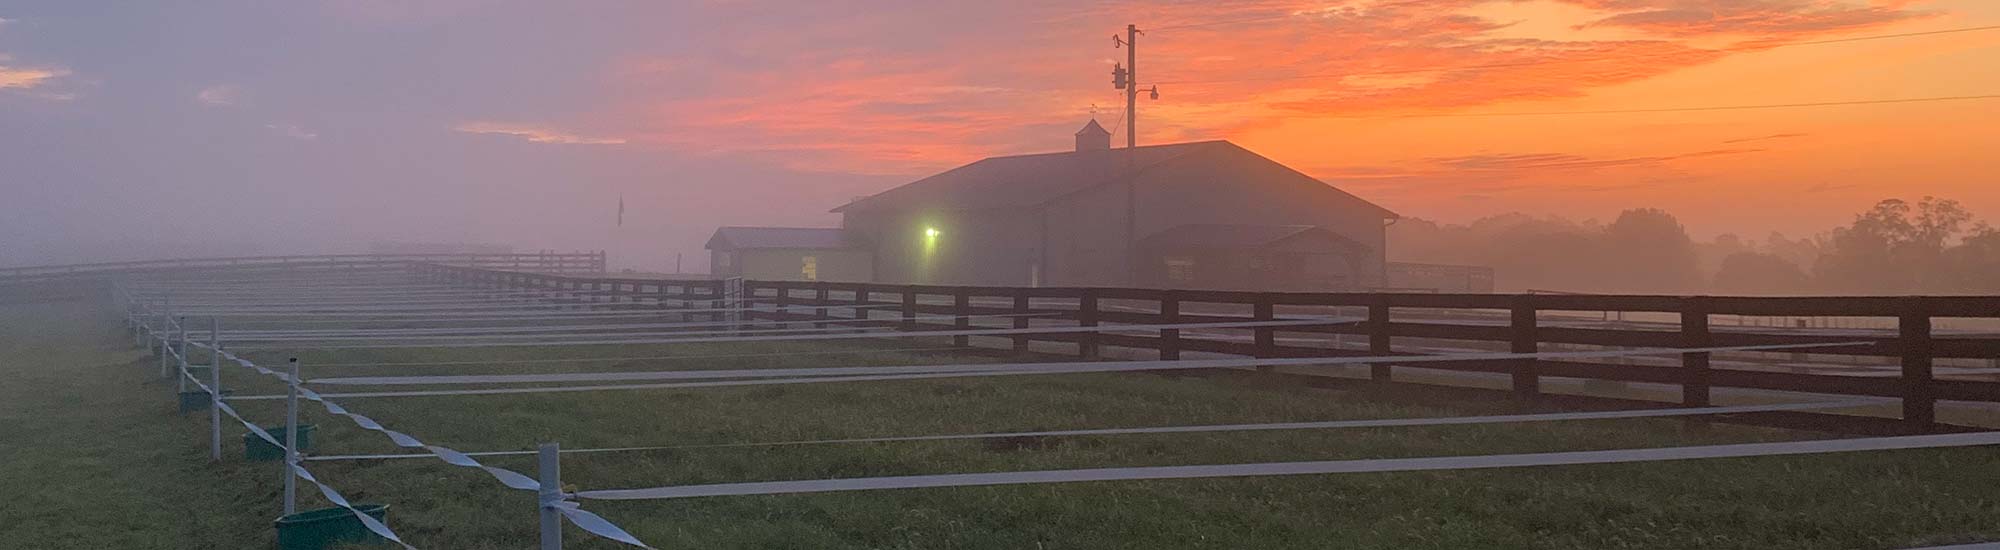 Sale barn and pens with fog